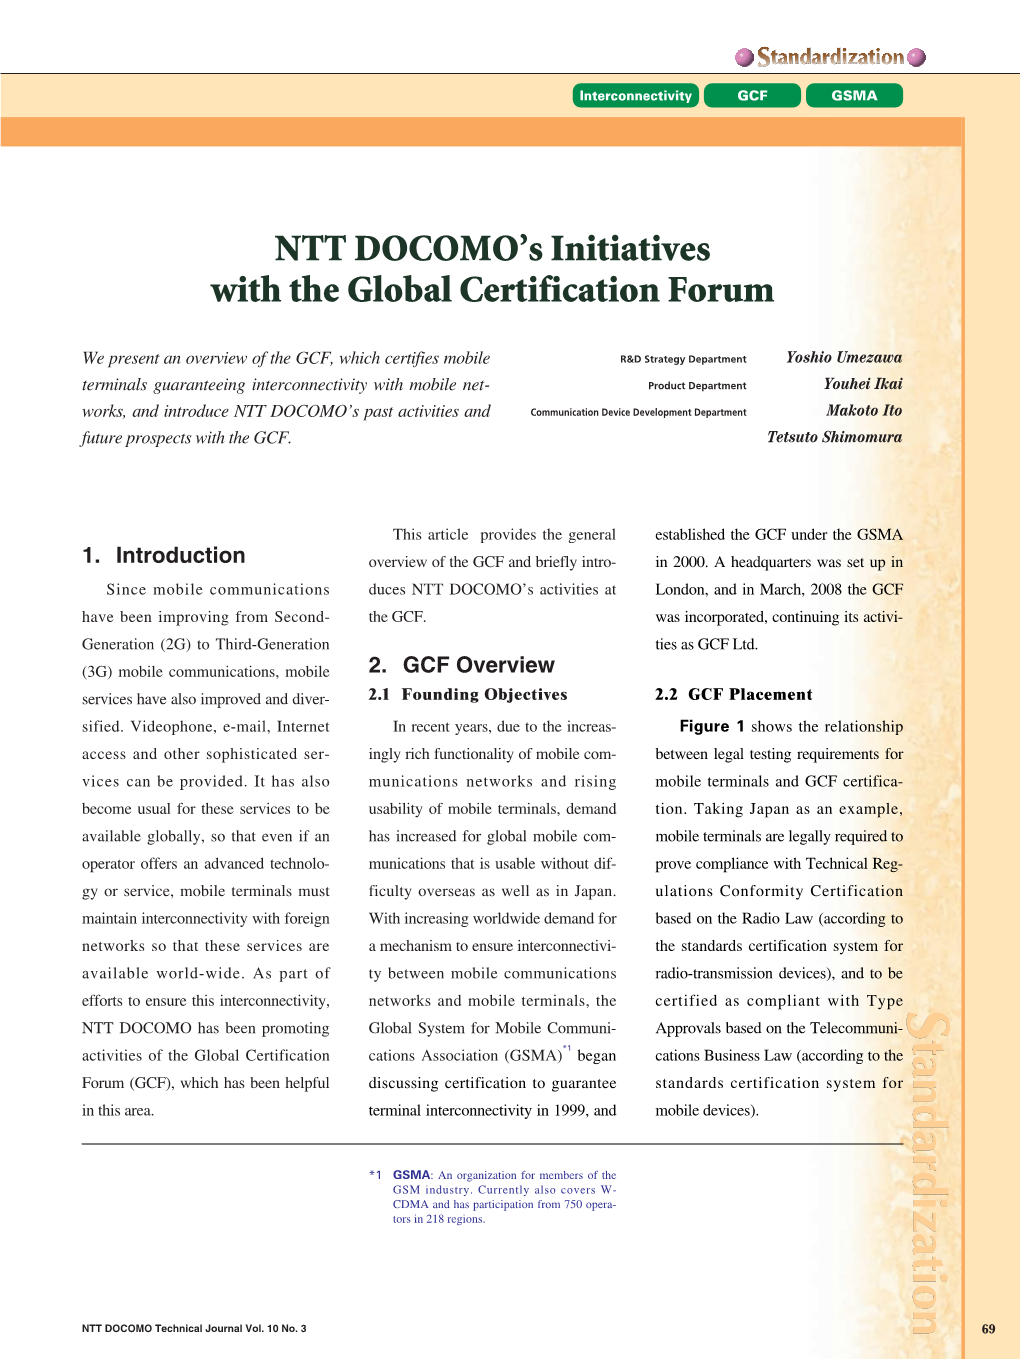 NTT DOCOMO's Initiatives with the Global Certification Forum